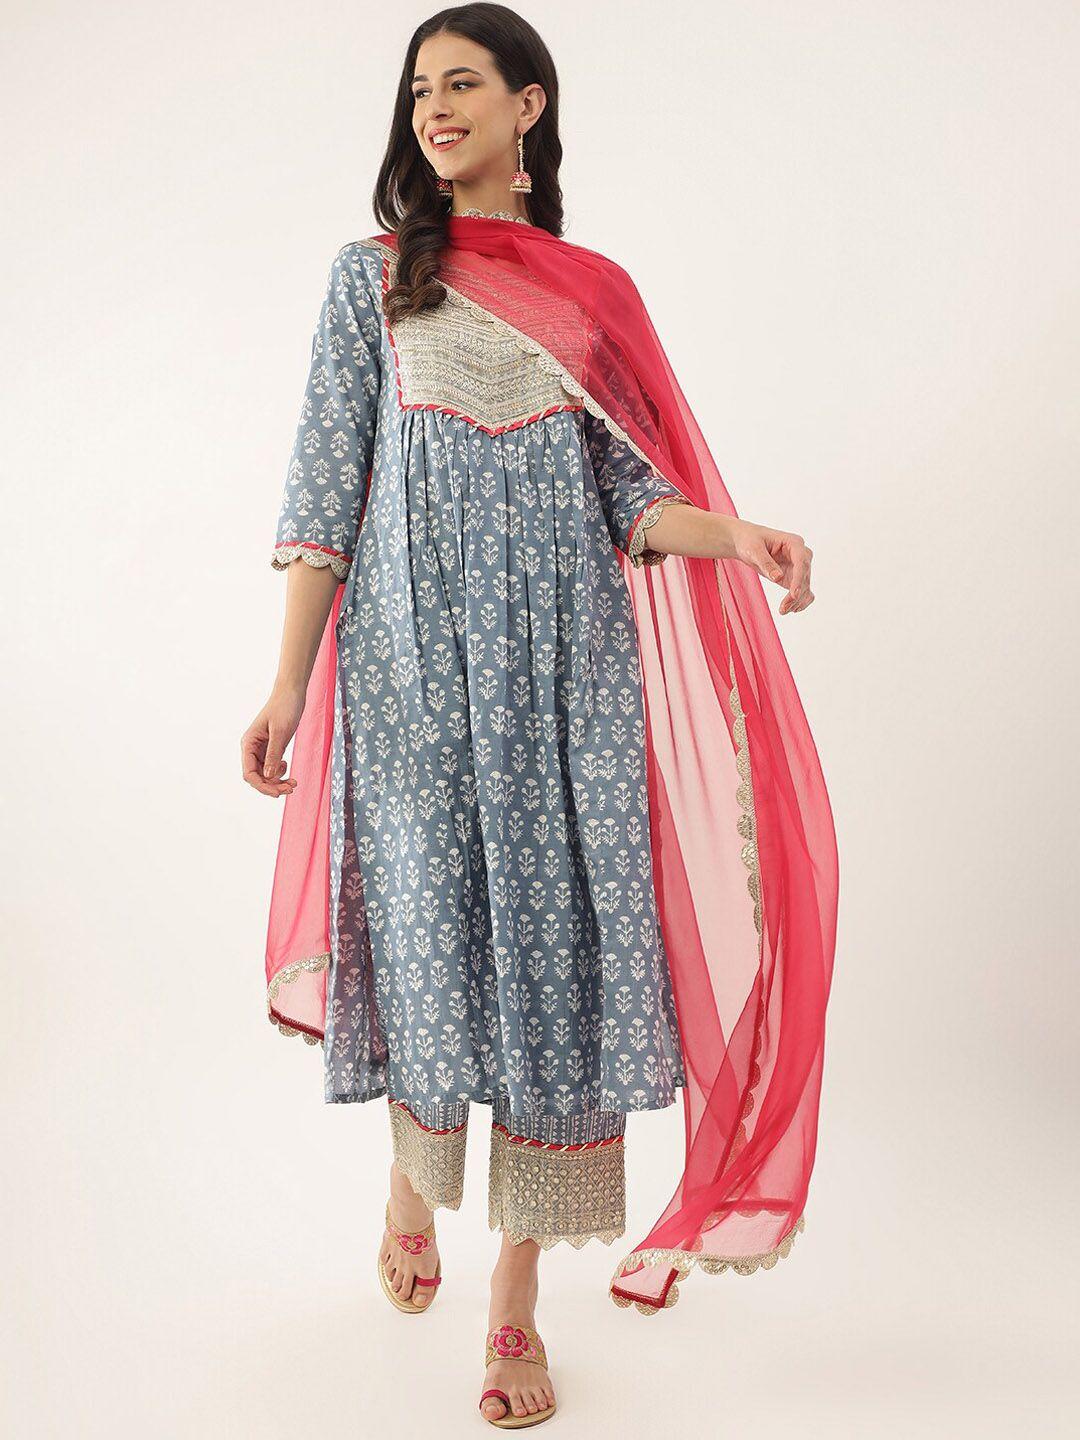 khushal-k-floral-printed-zari-sequined-a-line-pure-cotton-kurta-with-palazzos-&-dupatta